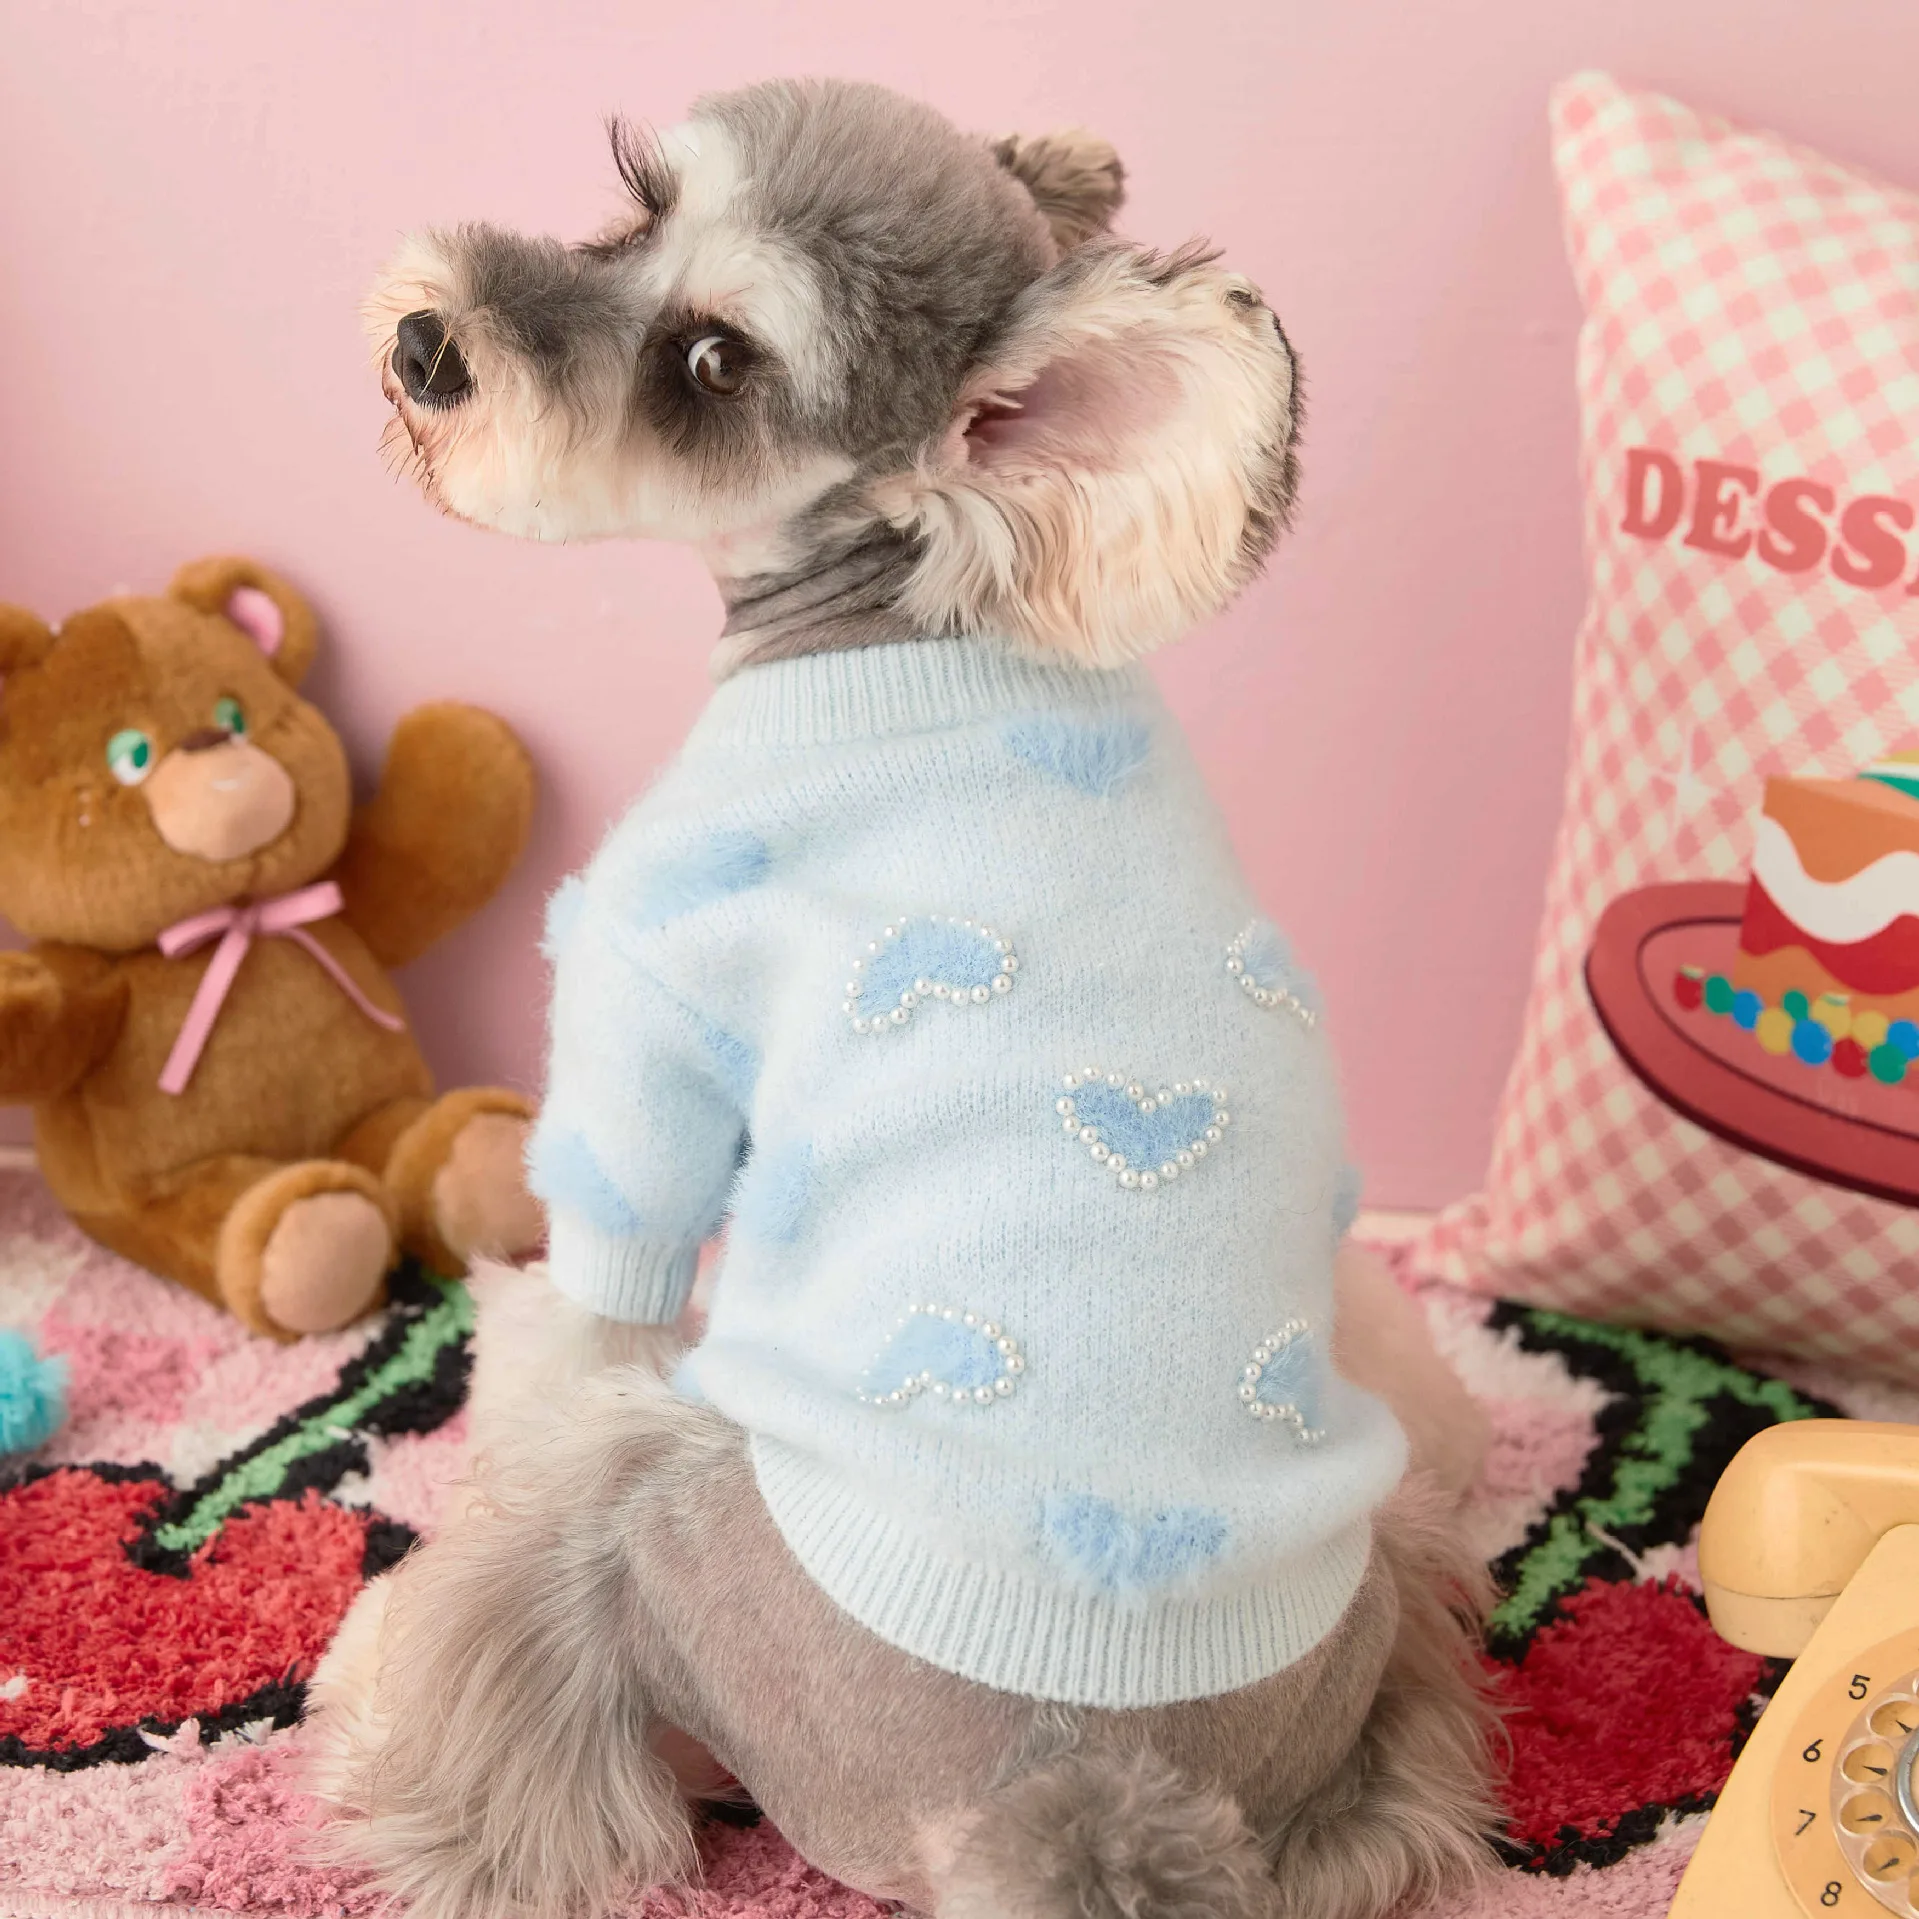 

Blue Beaded Round Neck Sweater for Pet, Cute Dog Clothes, Teddy, Fadou, Pago Bears, Warm, Autumn and Winter